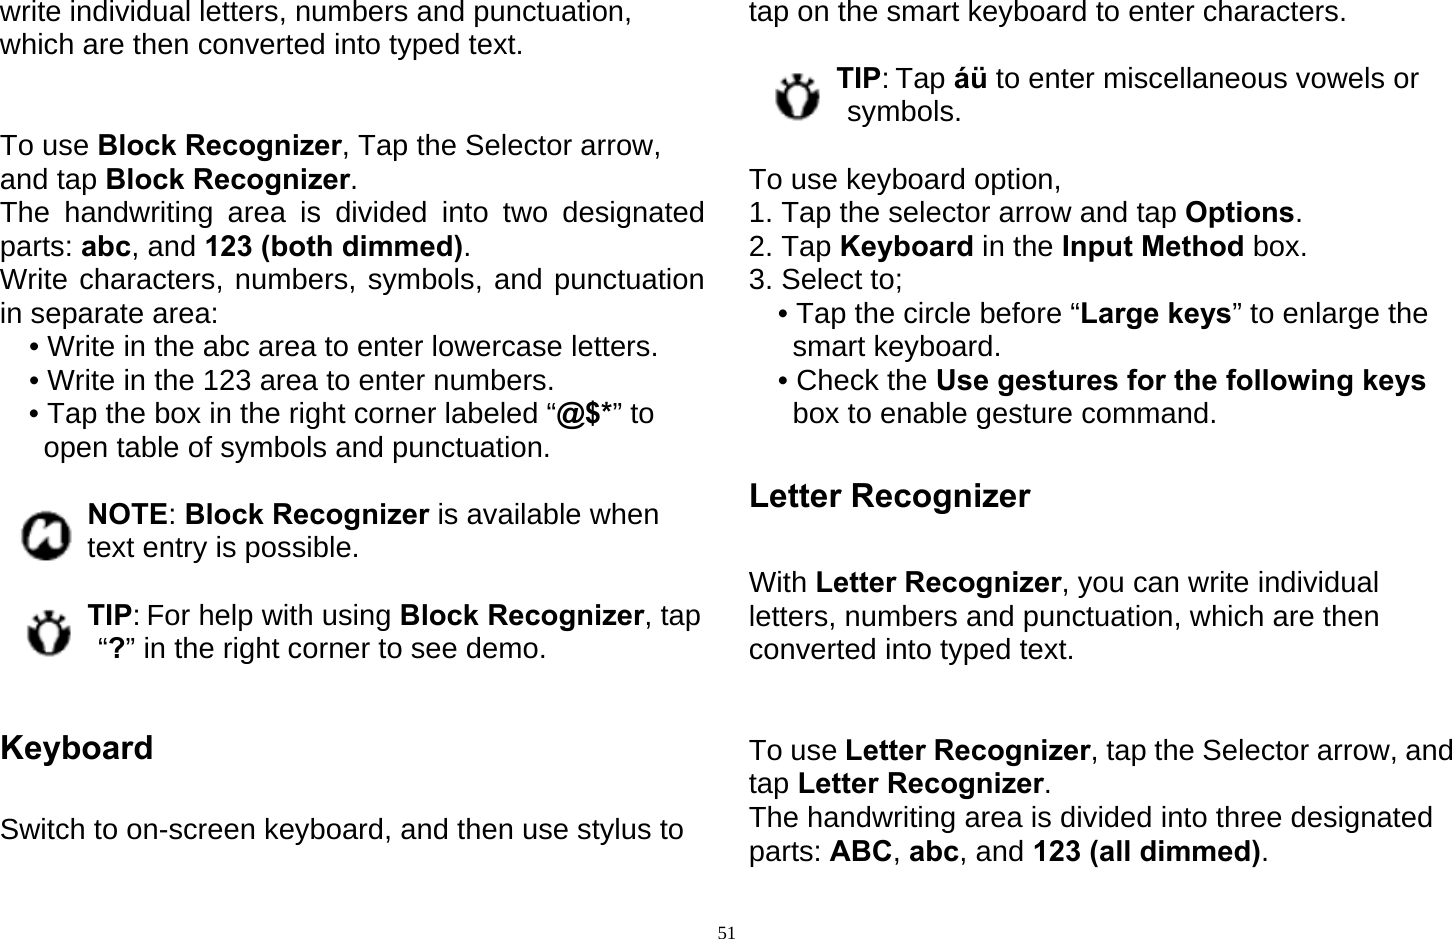   51write individual letters, numbers and punctuation, which are then converted into typed text.   To use Block Recognizer, Tap the Selector arrow, and tap Block Recognizer. The handwriting area is divided into two designated parts: abc, and 123 (both dimmed). Write characters, numbers, symbols, and punctuation in separate area: • Write in the abc area to enter lowercase letters. • Write in the 123 area to enter numbers. • Tap the box in the right corner labeled “@$*” to open table of symbols and punctuation.  NOTE: Block Recognizer is available when text entry is possible.  TIP: For help with using Block Recognizer, tap “?” in the right corner to see demo.  Keyboard  Switch to on-screen keyboard, and then use stylus to tap on the smart keyboard to enter characters.    TIP: Tap áü to enter miscellaneous vowels or symbols.  To use keyboard option,   1. Tap the selector arrow and tap Options. 2. Tap Keyboard in the Input Method box. 3. Select to; • Tap the circle before “Large keys” to enlarge the smart keyboard. • Check the Use gestures for the following keys box to enable gesture command.  Letter Recognizer  With Letter Recognizer, you can write individual letters, numbers and punctuation, which are then converted into typed text.   To use Letter Recognizer, tap the Selector arrow, and tap Letter Recognizer. The handwriting area is divided into three designated parts: ABC, abc, and 123 (all dimmed). 